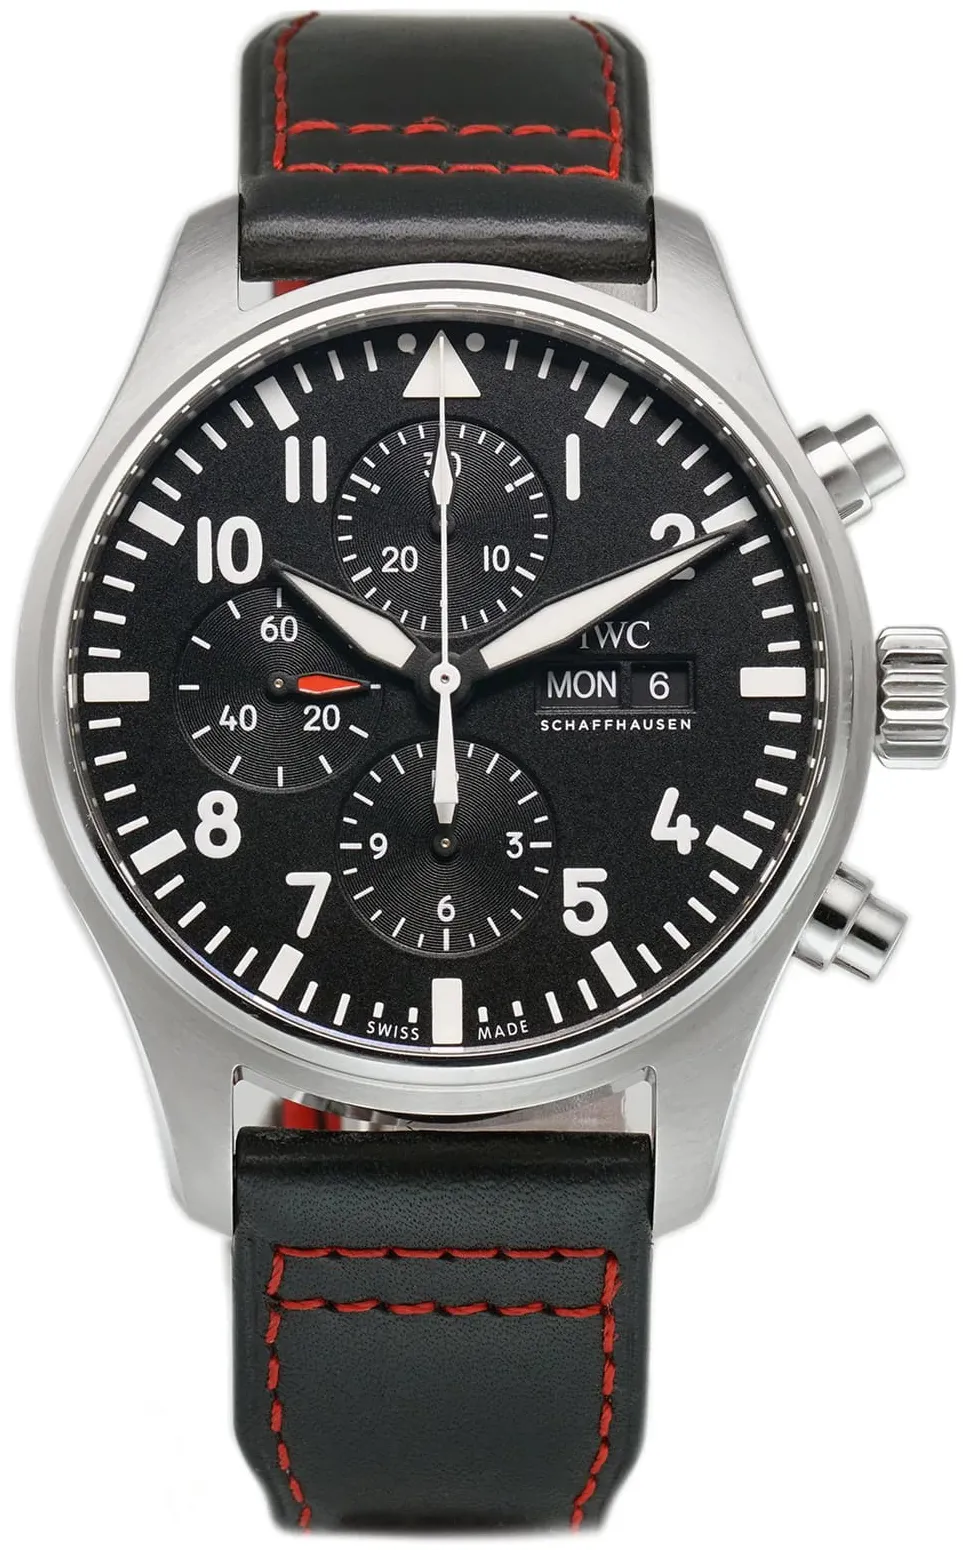 IWC Pilot IW377709 43mm Stainless steel Black